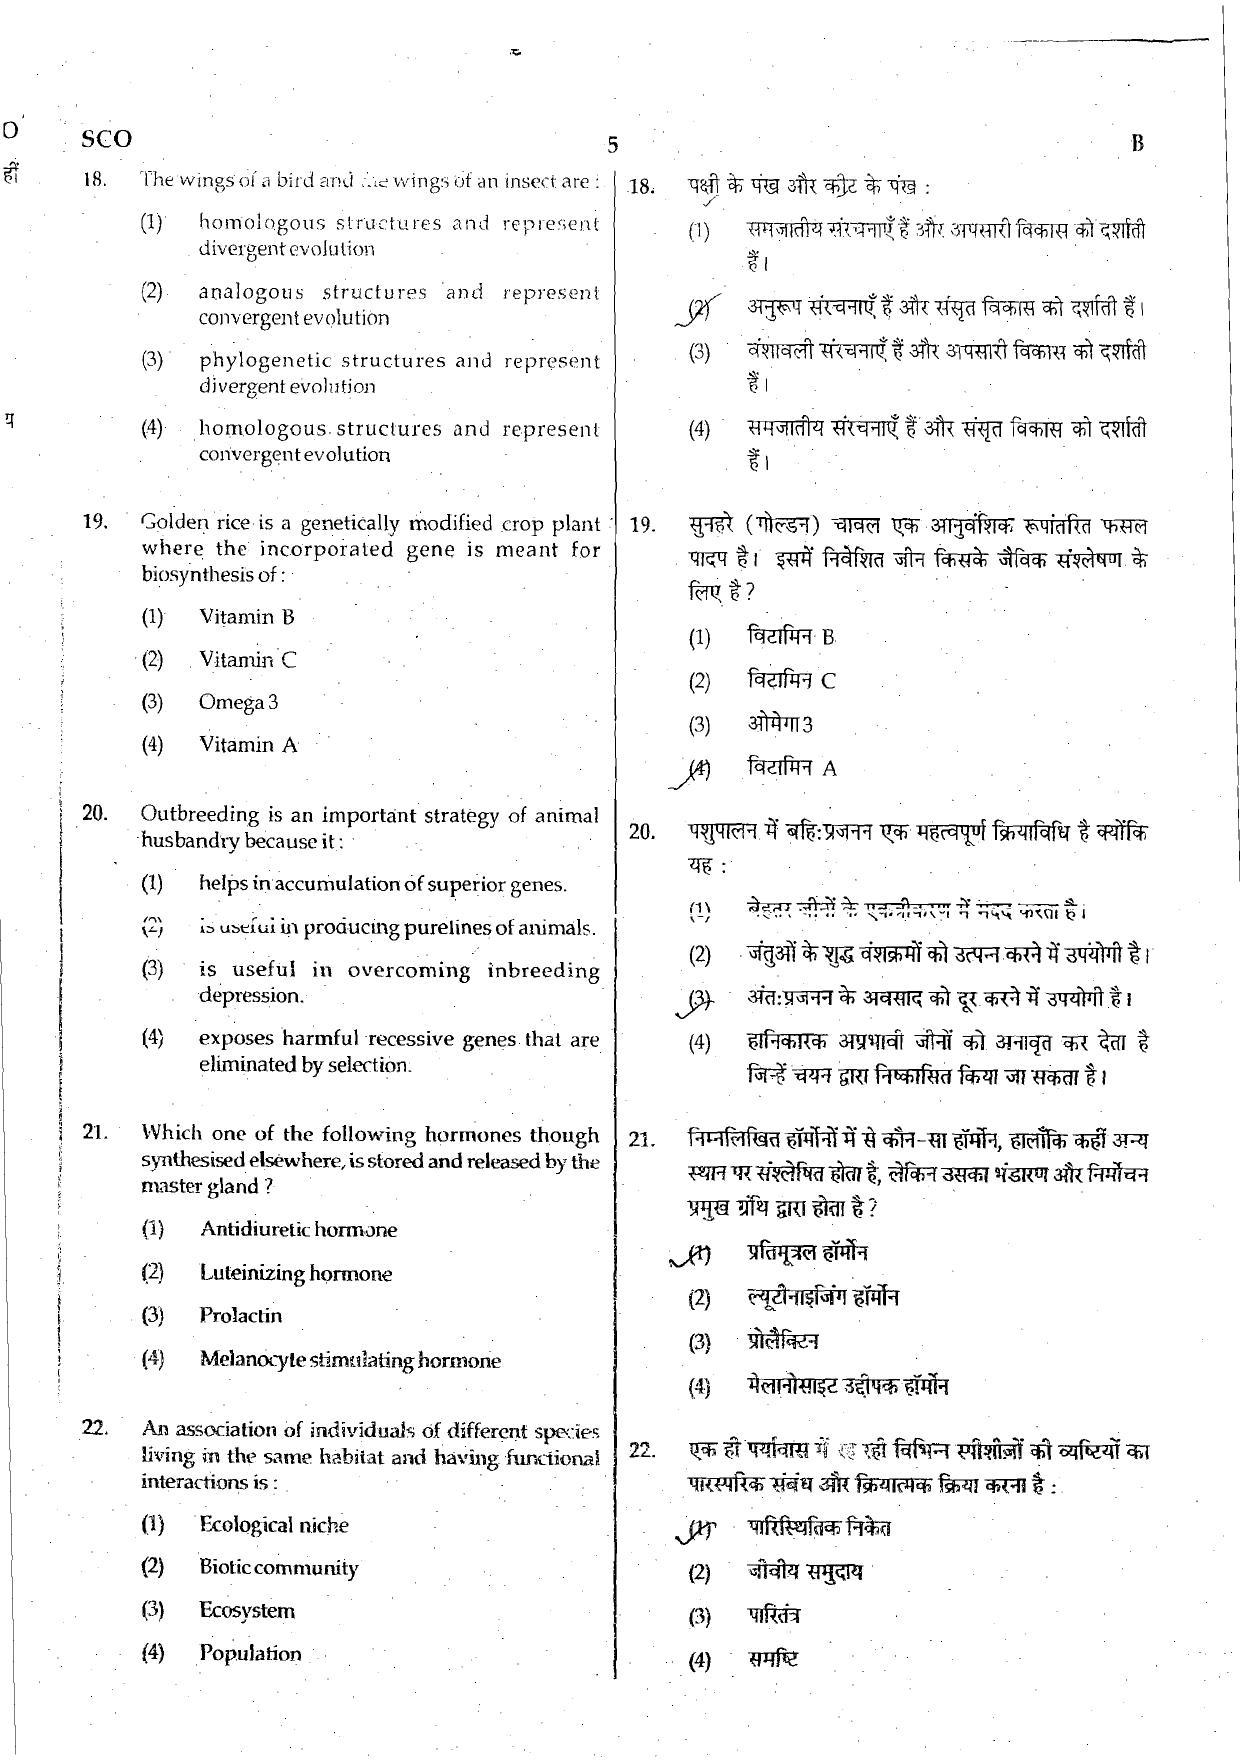 NEET Code B 2015 Question Paper - Page 5